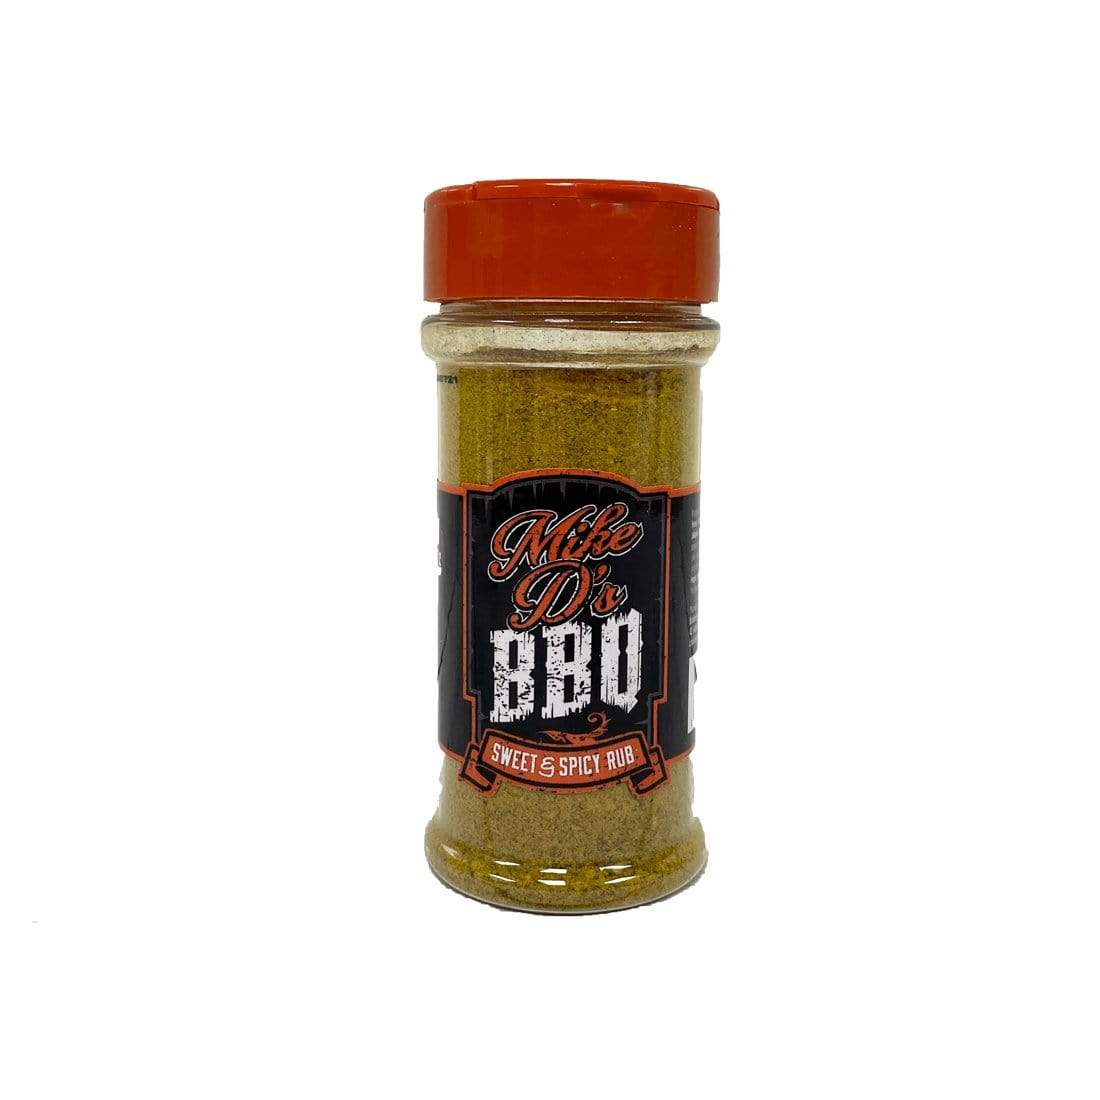 Mike D's BBQ Mike D's Sweet & Spicy Rub